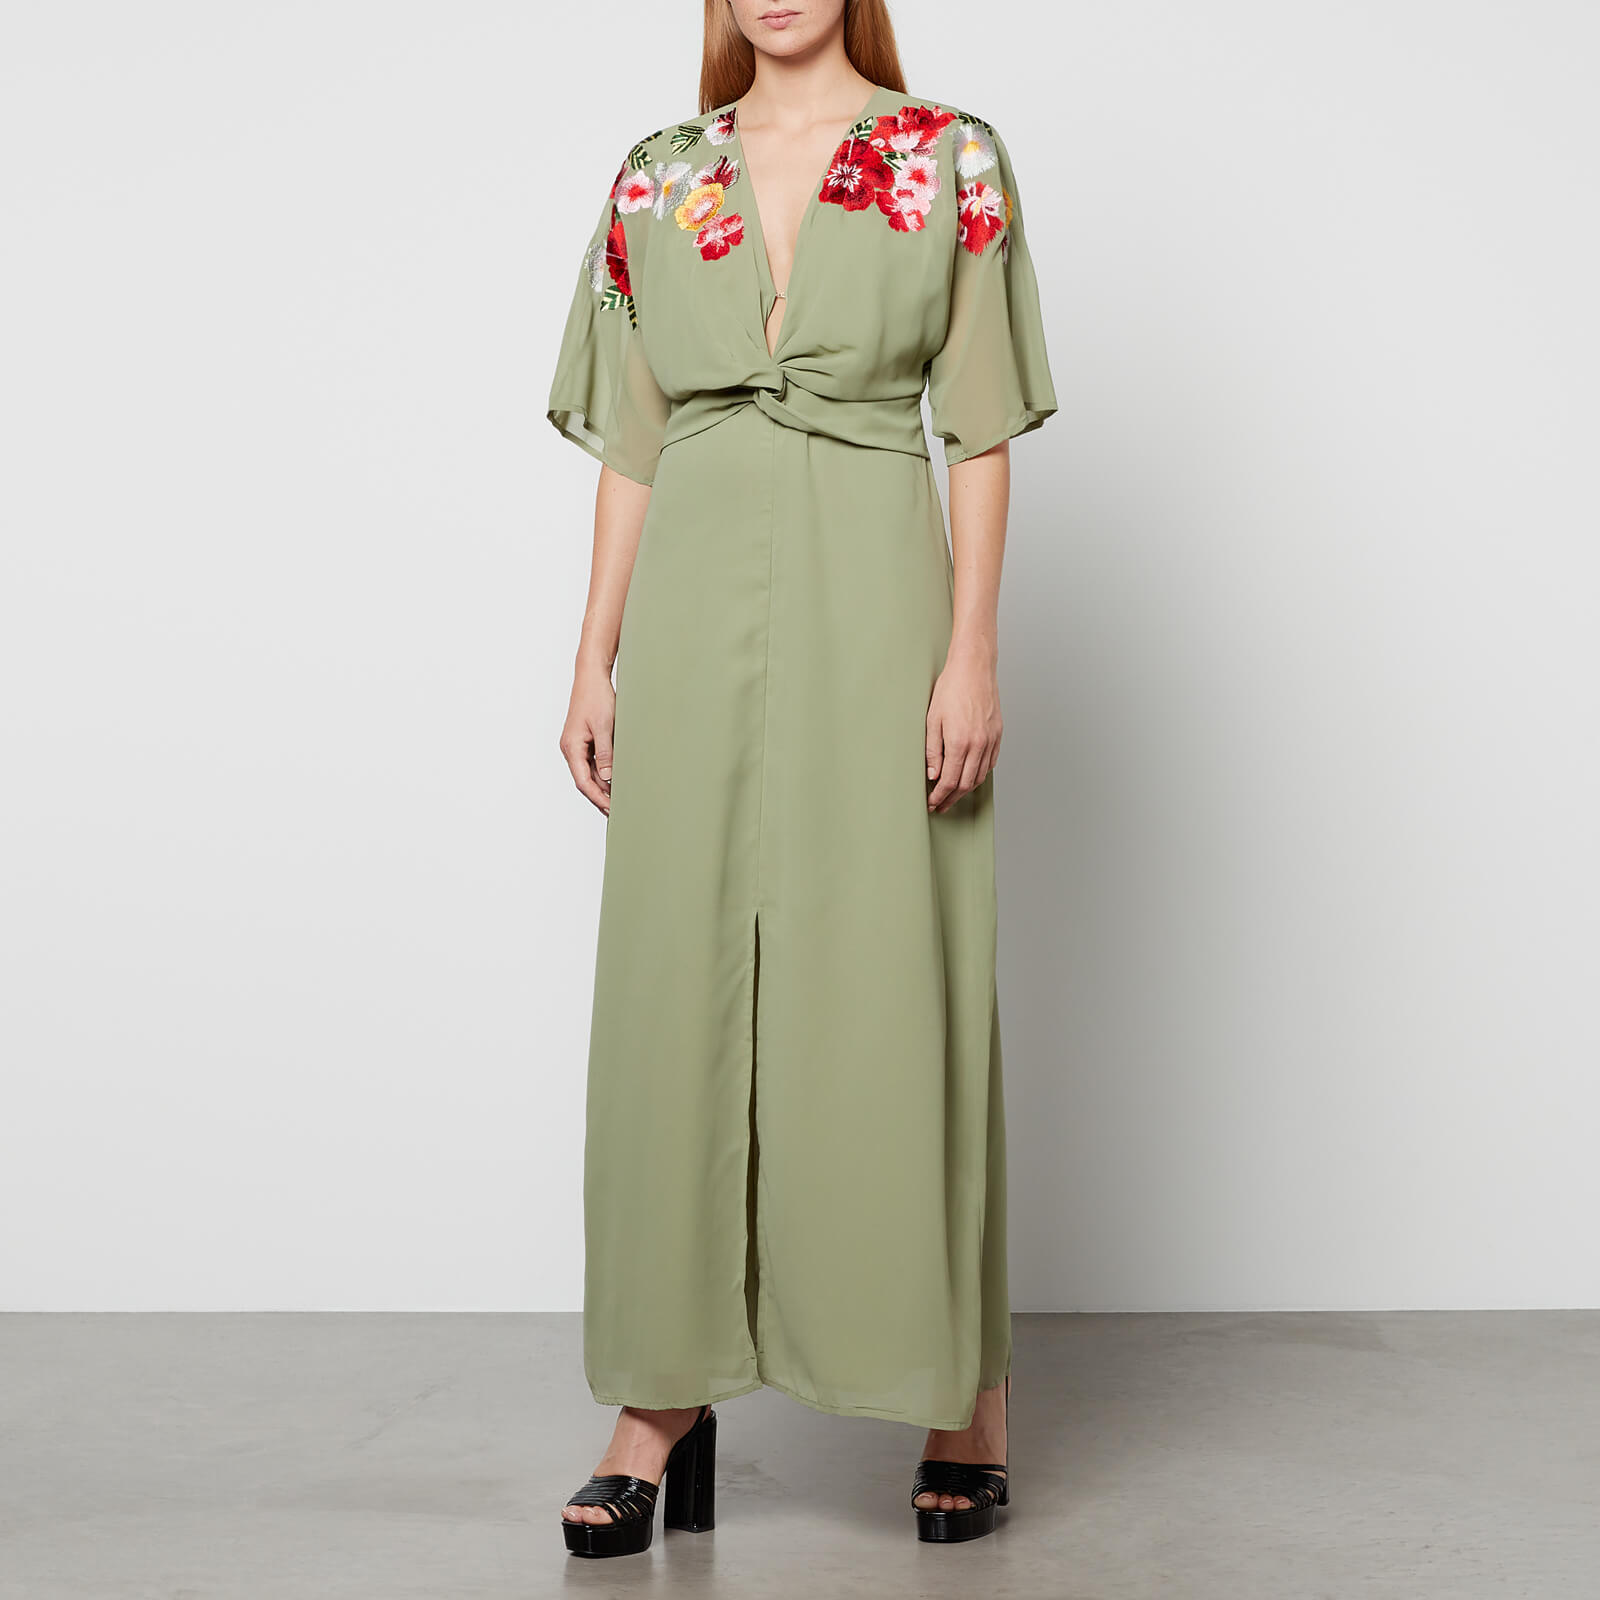 Hope & Ivy Cora Floral-Embroidered Chiffon Maxi Dress - UK 10 von Hope & Ivy